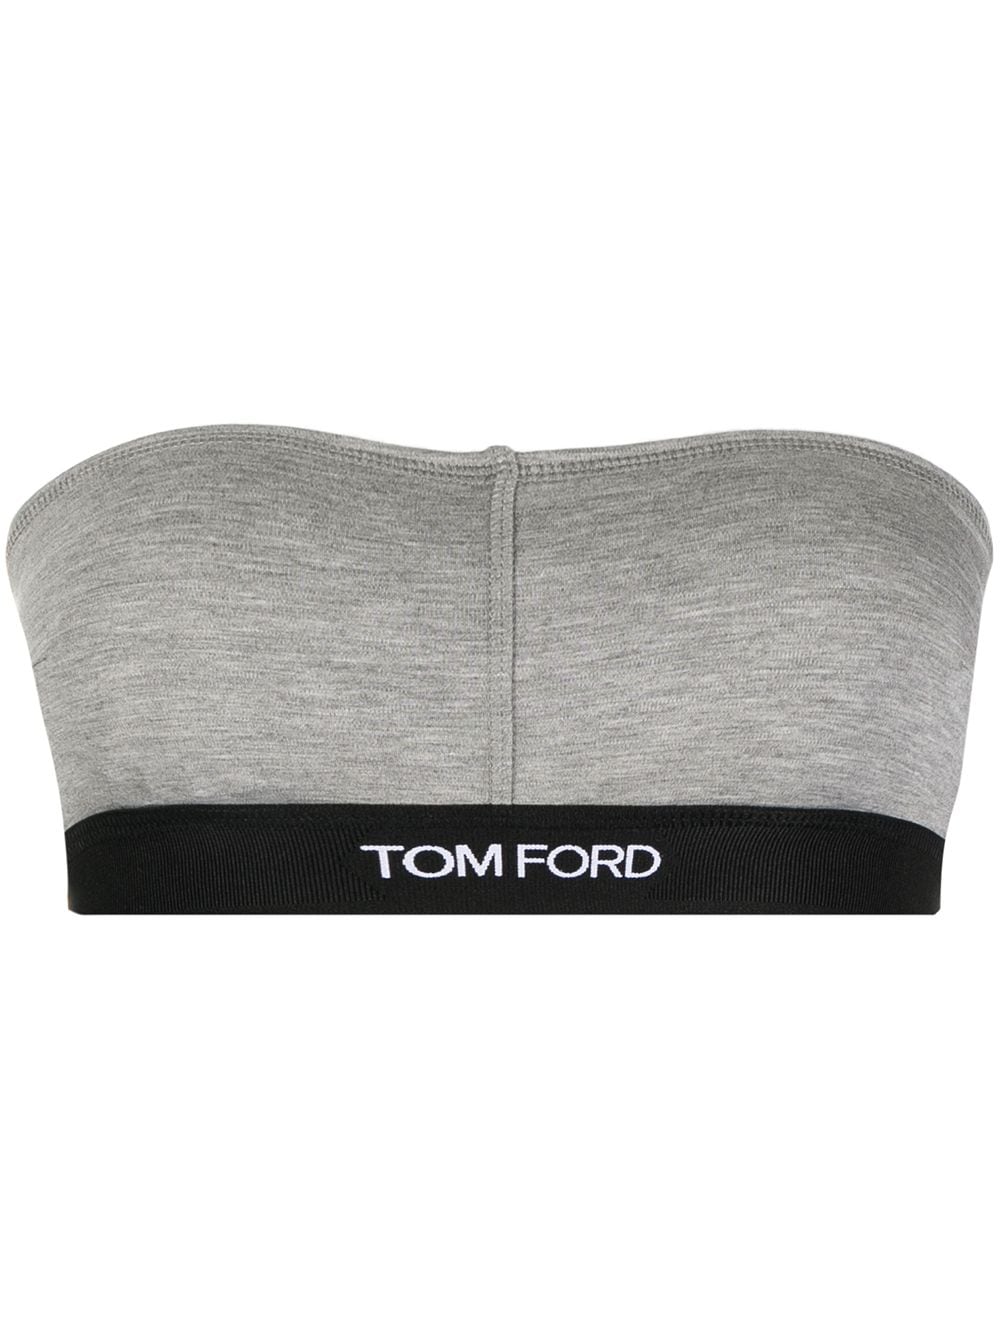 TOM FORD SIGNATURE JERSEY-MODAL BANDEAU TOP